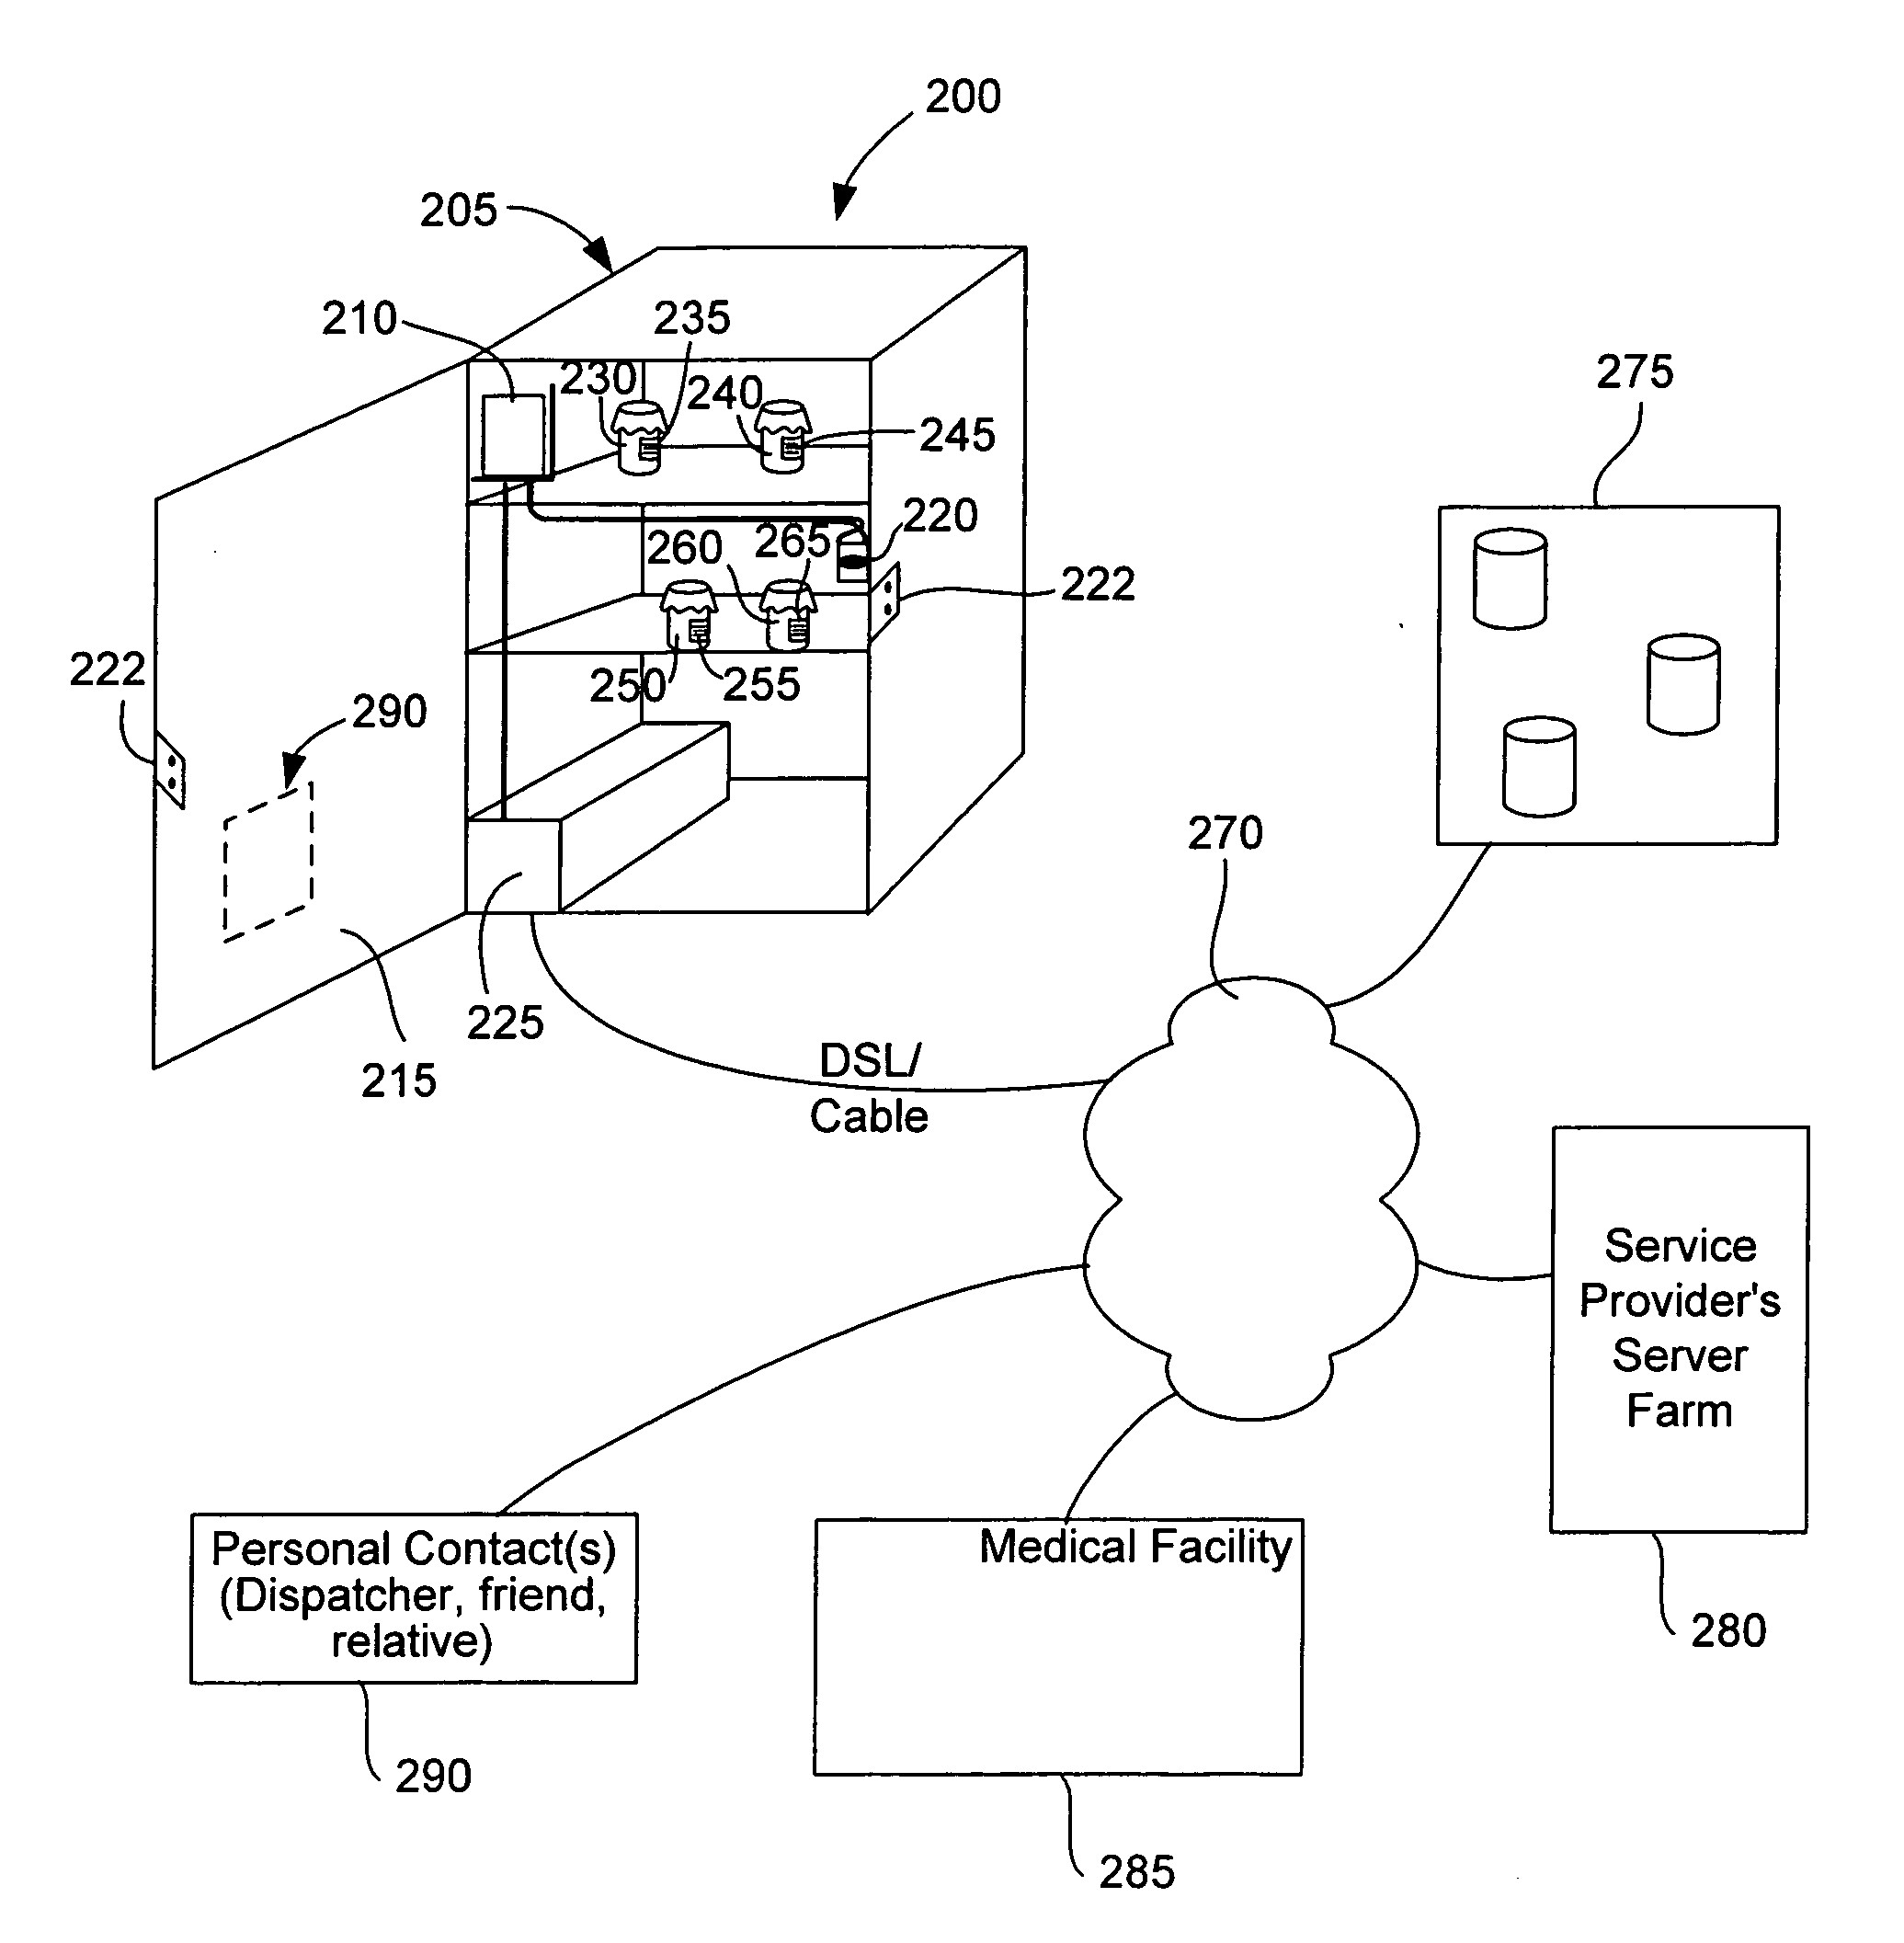 Methods and devices for providing alerts for spoilage and hazardous combinations